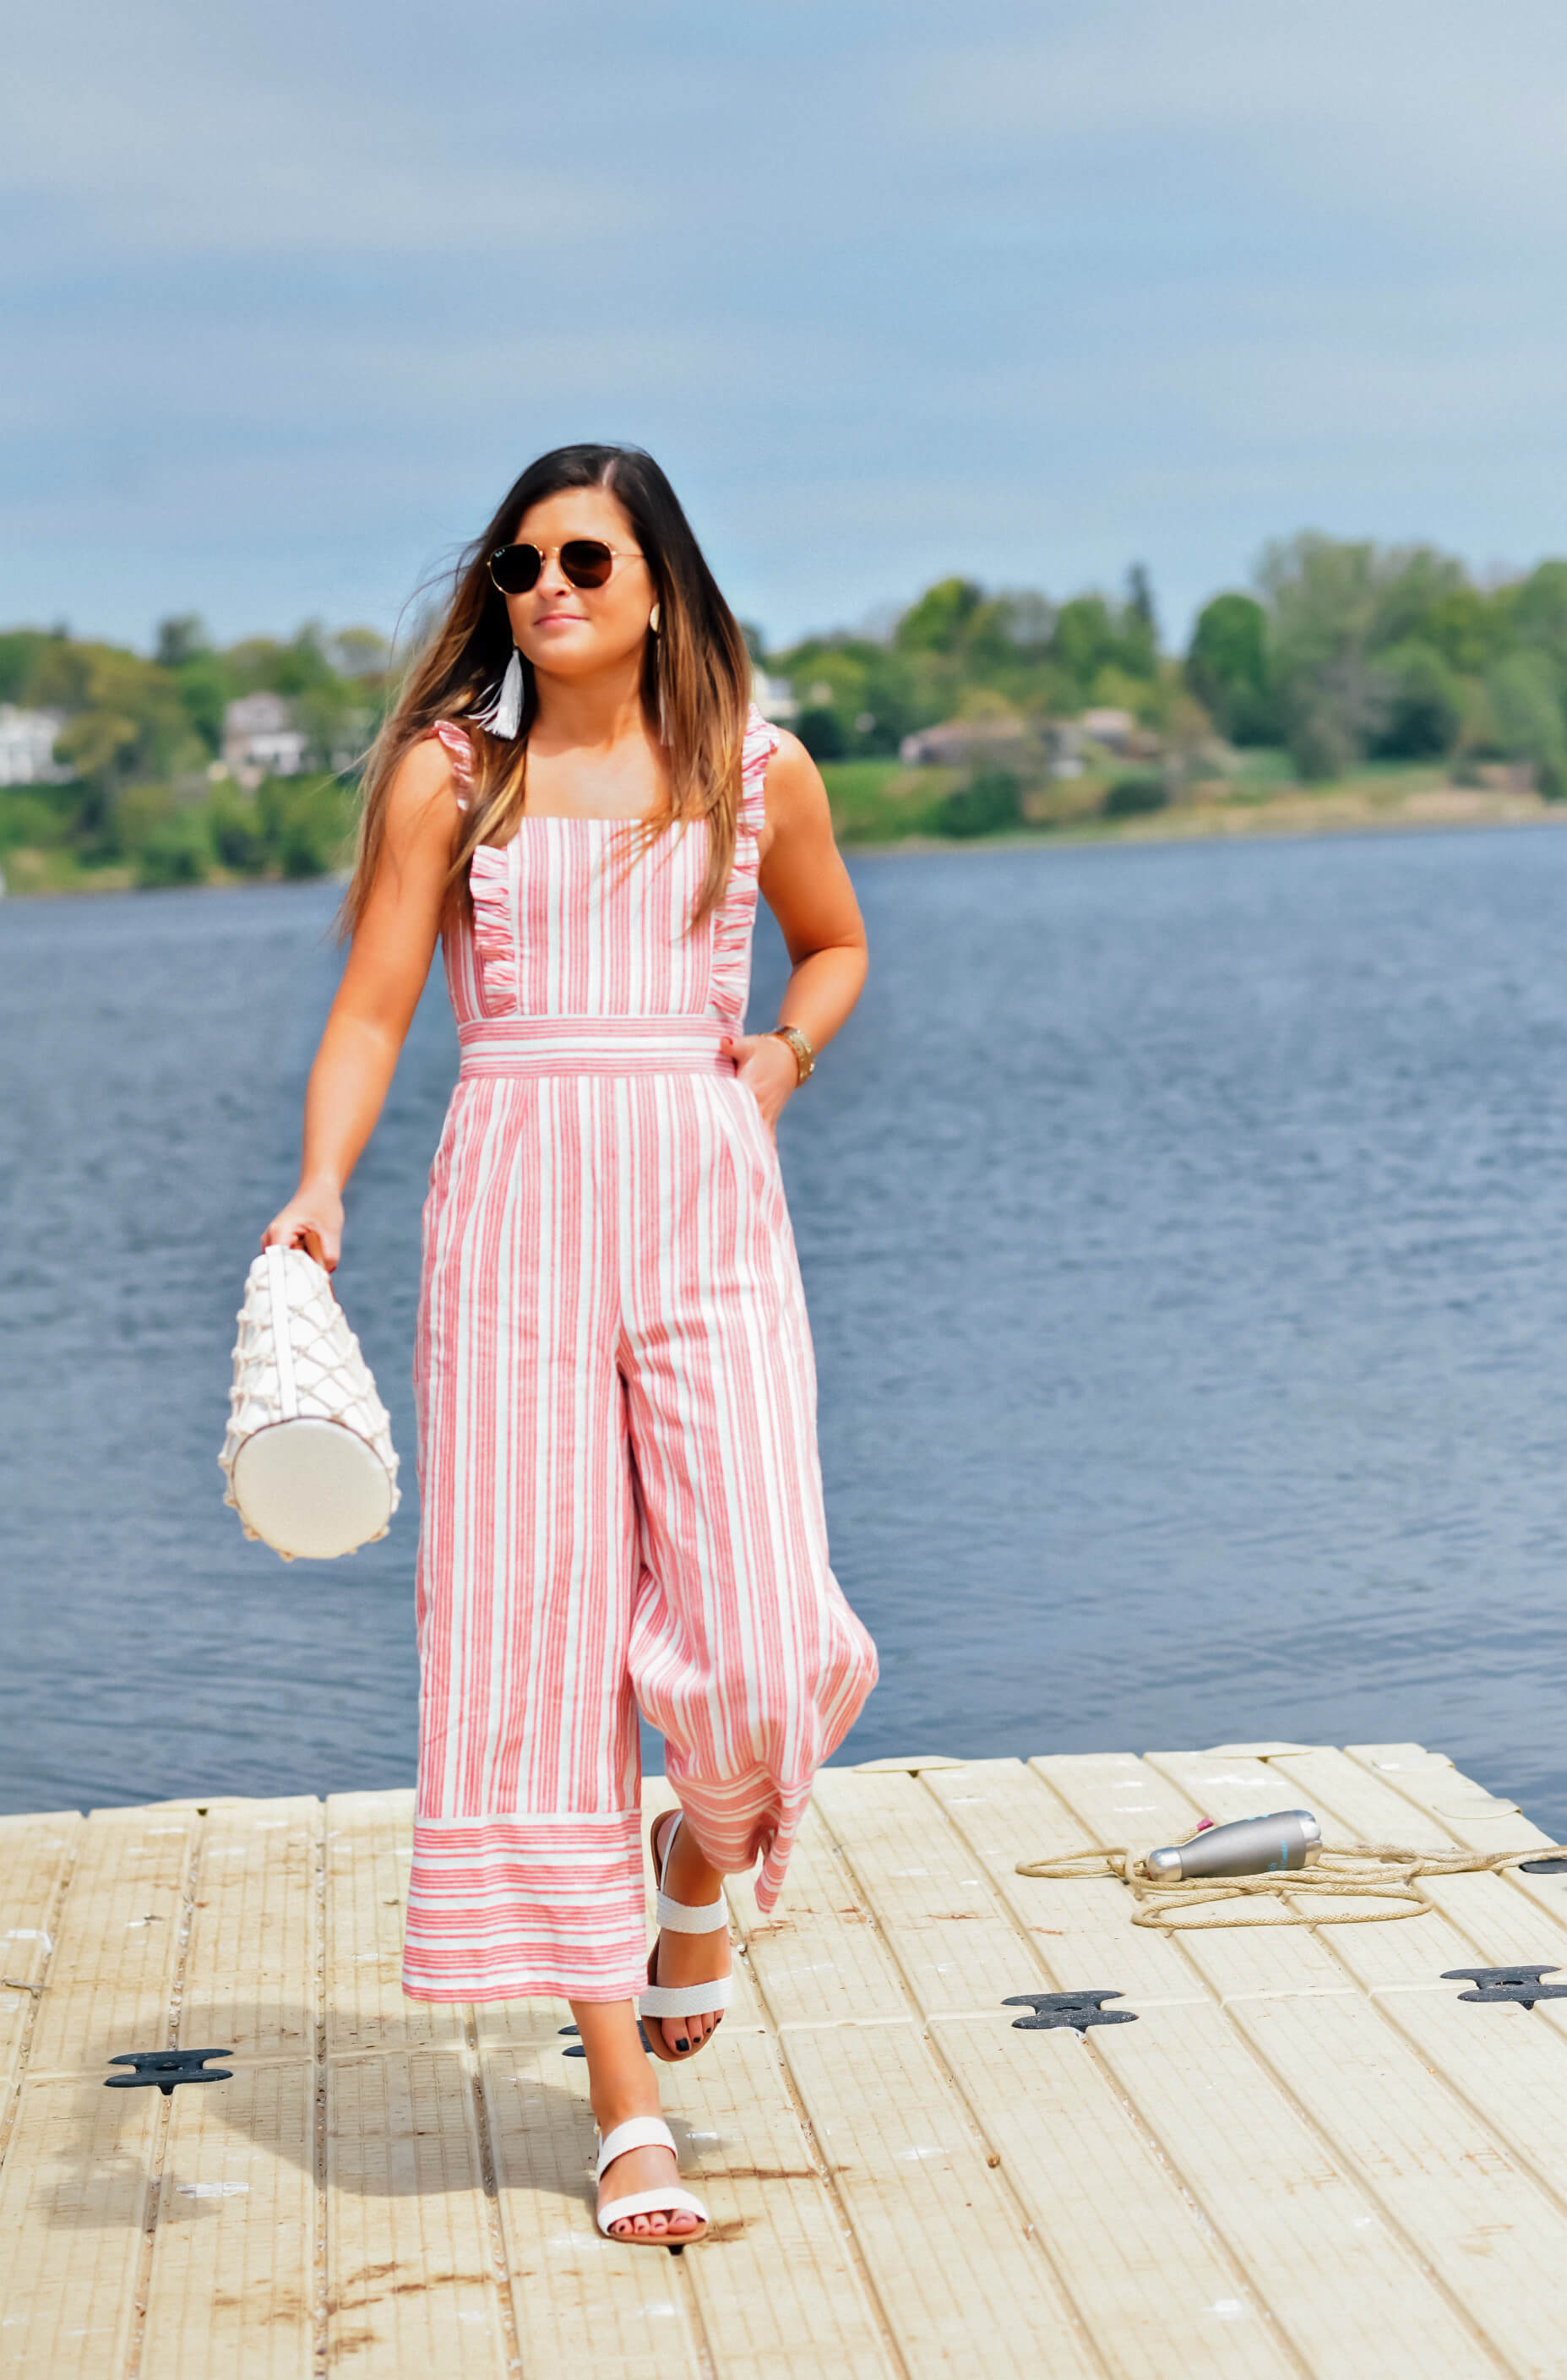 LULUS EMILIA RAE WHITE AND RED STRIPED RUFFLE CULOTTE JUMPSUIT, LULUS BLAISE WHITE FLAT SANDALS, LULUS MELLOW MOOD WHITE NET TOTE, LULUS STAY RAD WHITE WOVEN RATTAN TASSEL EARRINGS, Memorial Day Outfit Idea, Memorial Day Style, Tilden of To Be Bright